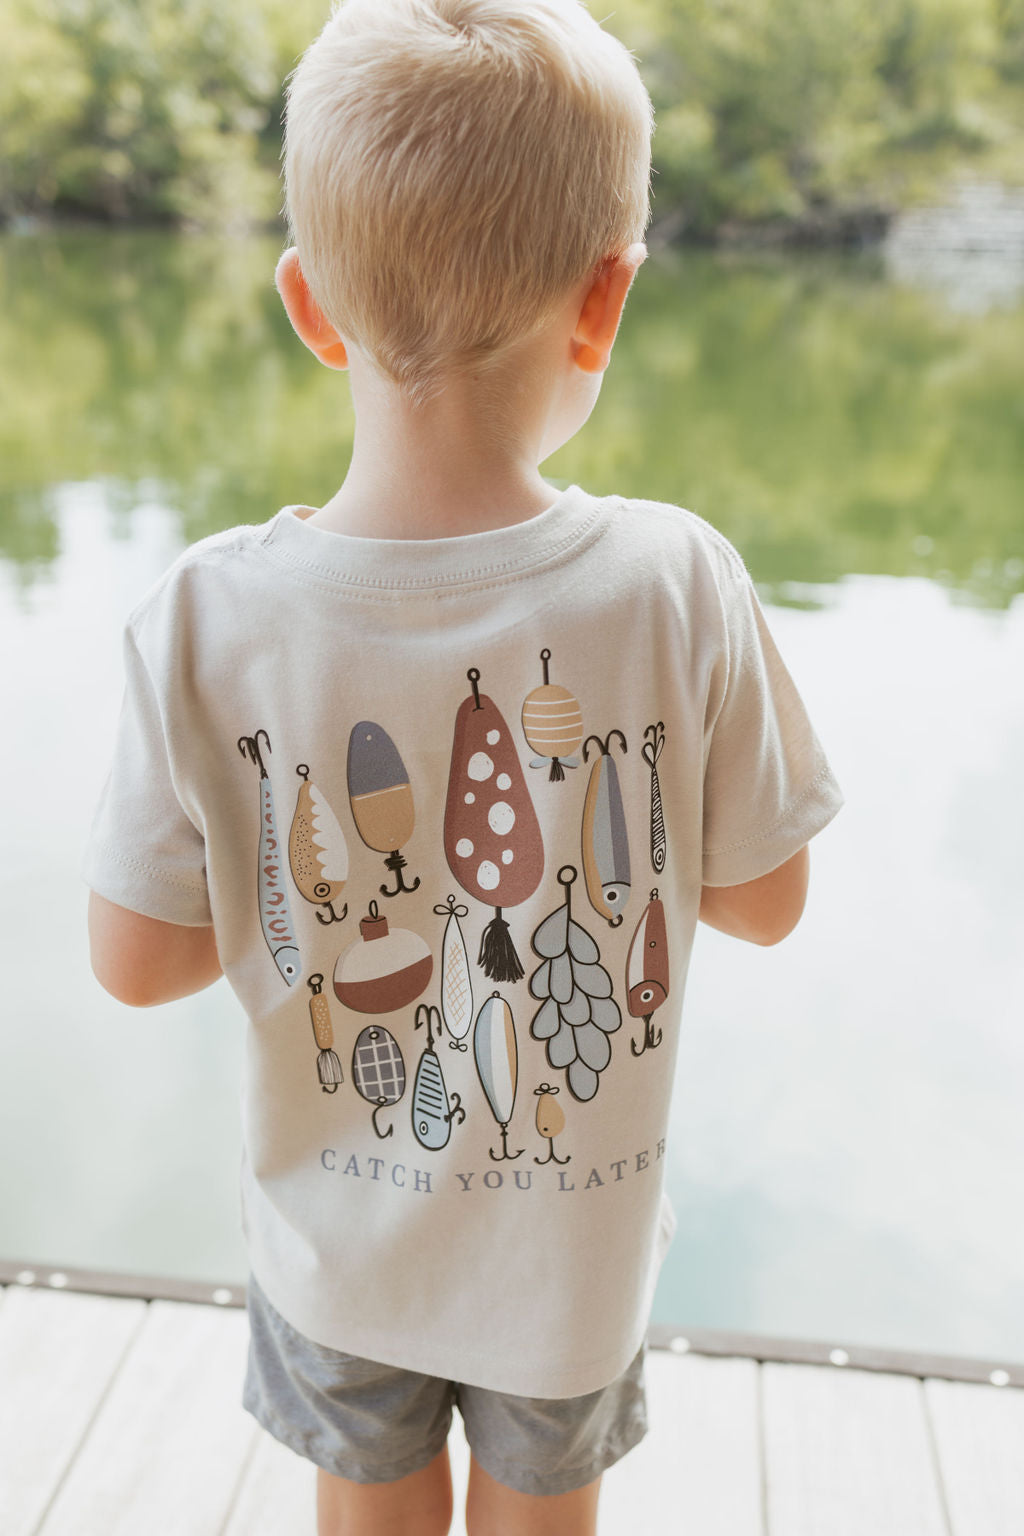 Catch You Later | Boy's Tee-Sister Shirts-Sister Shirts, Cute & Custom Tees for Mama & Littles in Trussville, Alabama.